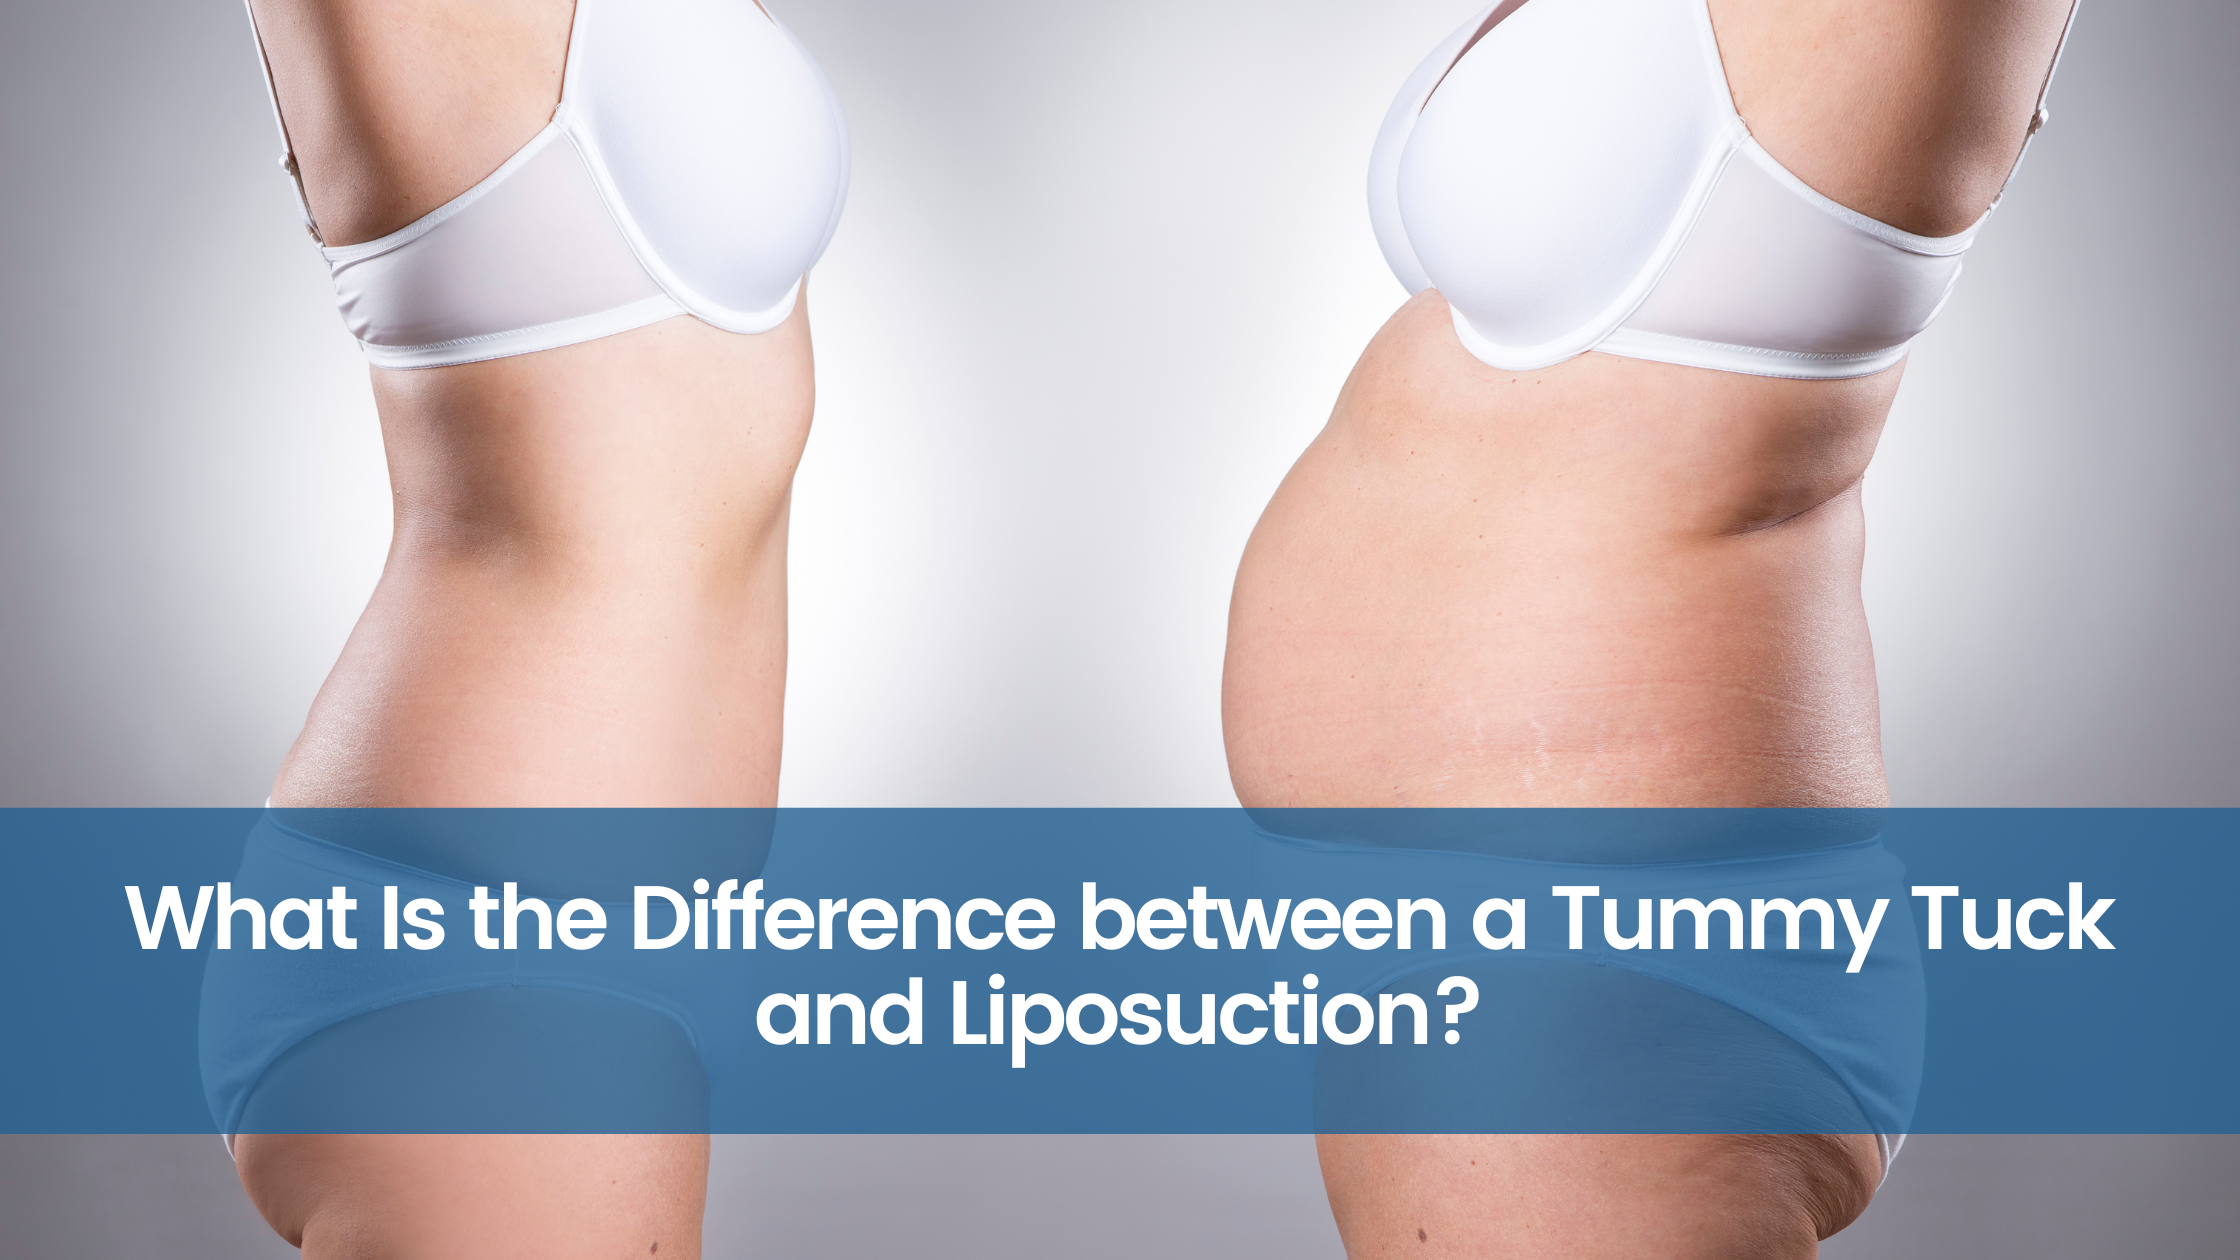 What Is the Difference between a Tummy Tuck and Liposuction?